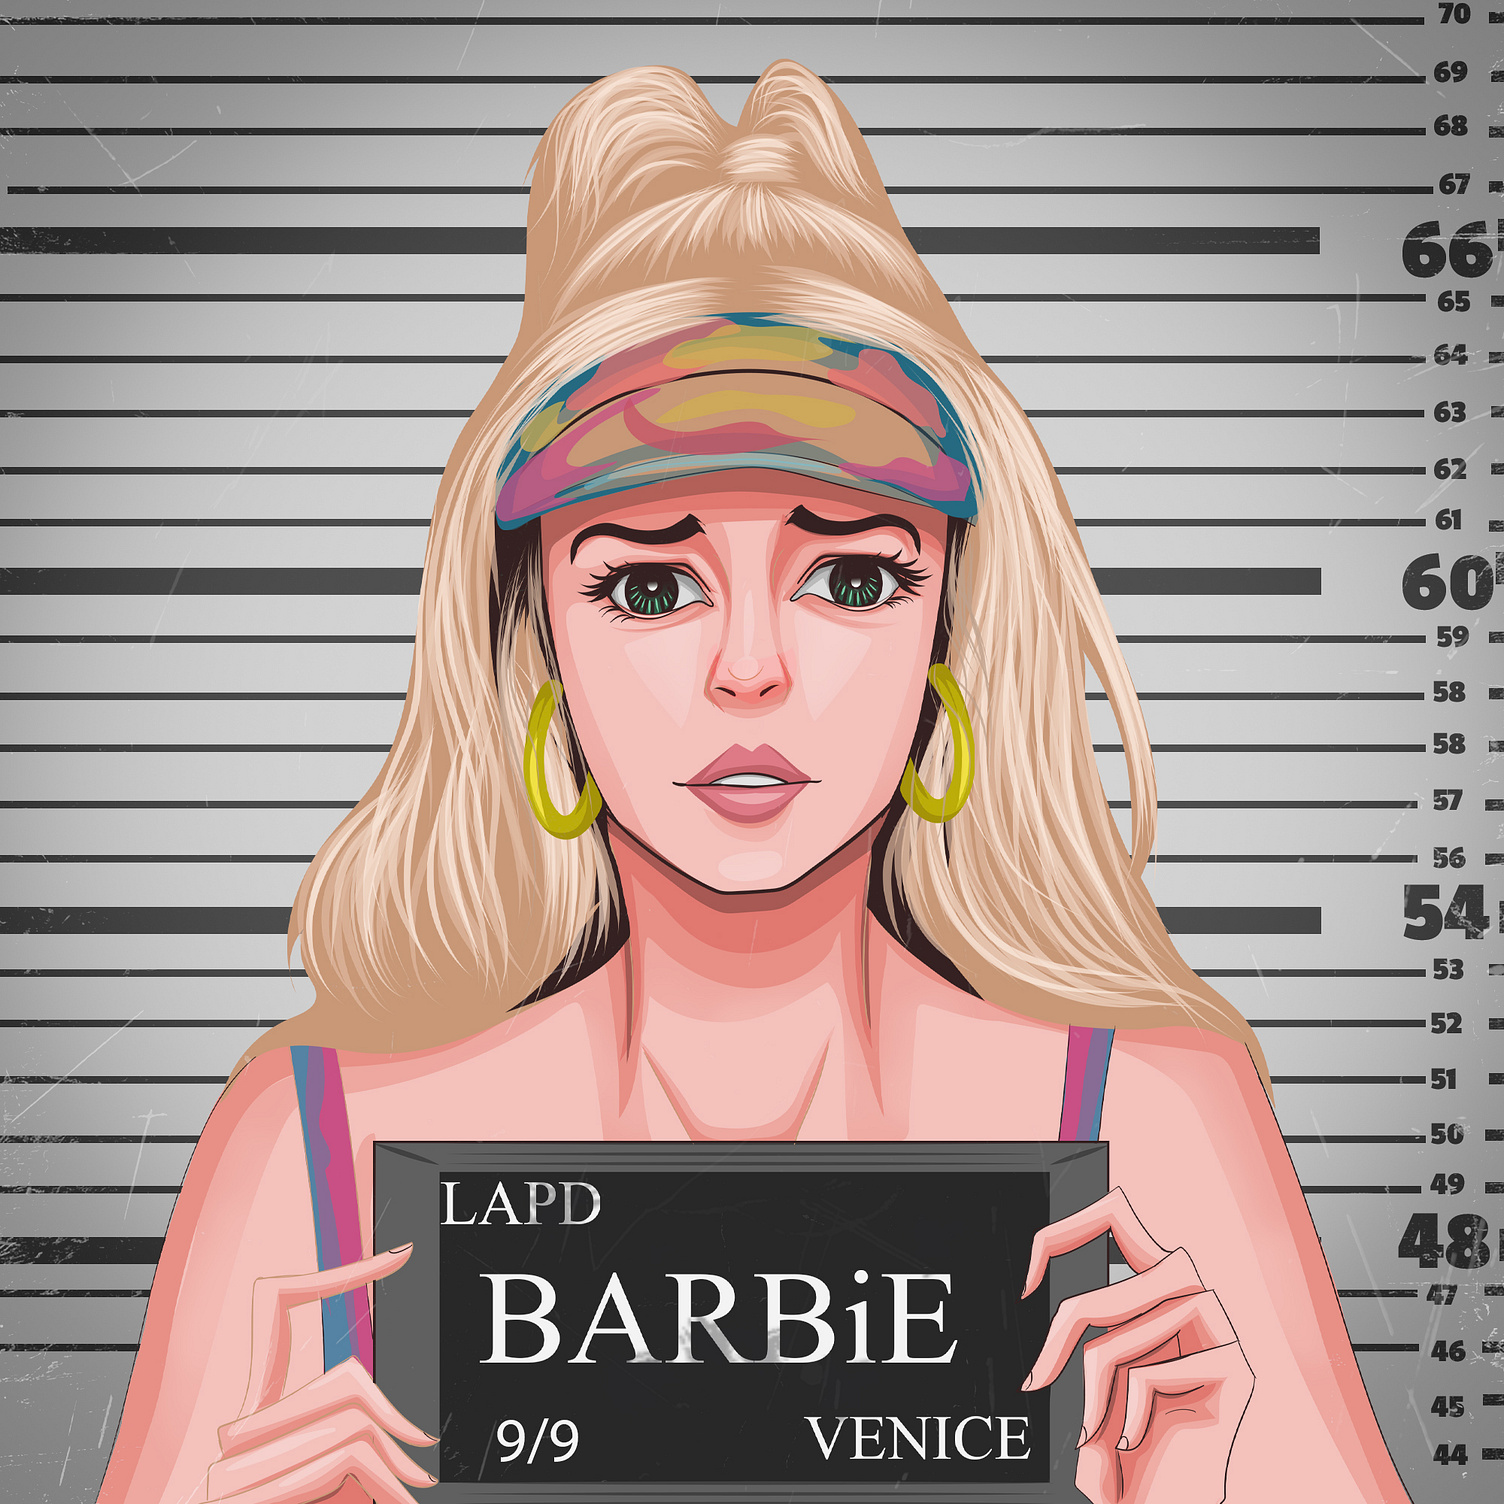 Barbie Character by Cleek Art for Mimadesign on Dribbble